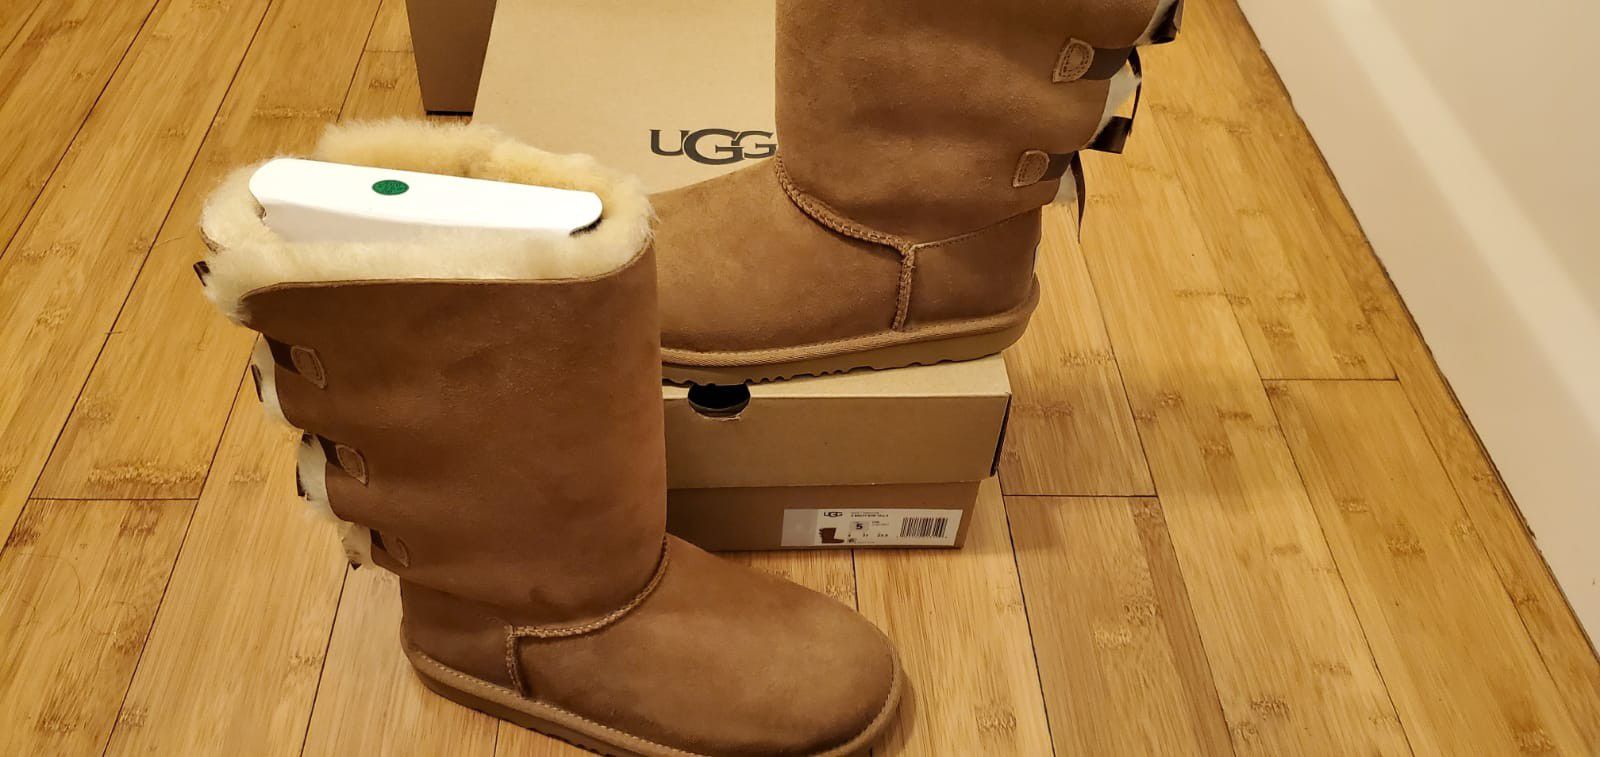 UGG Boots with 3 Bows in the Back size 7 and 8 for Women .